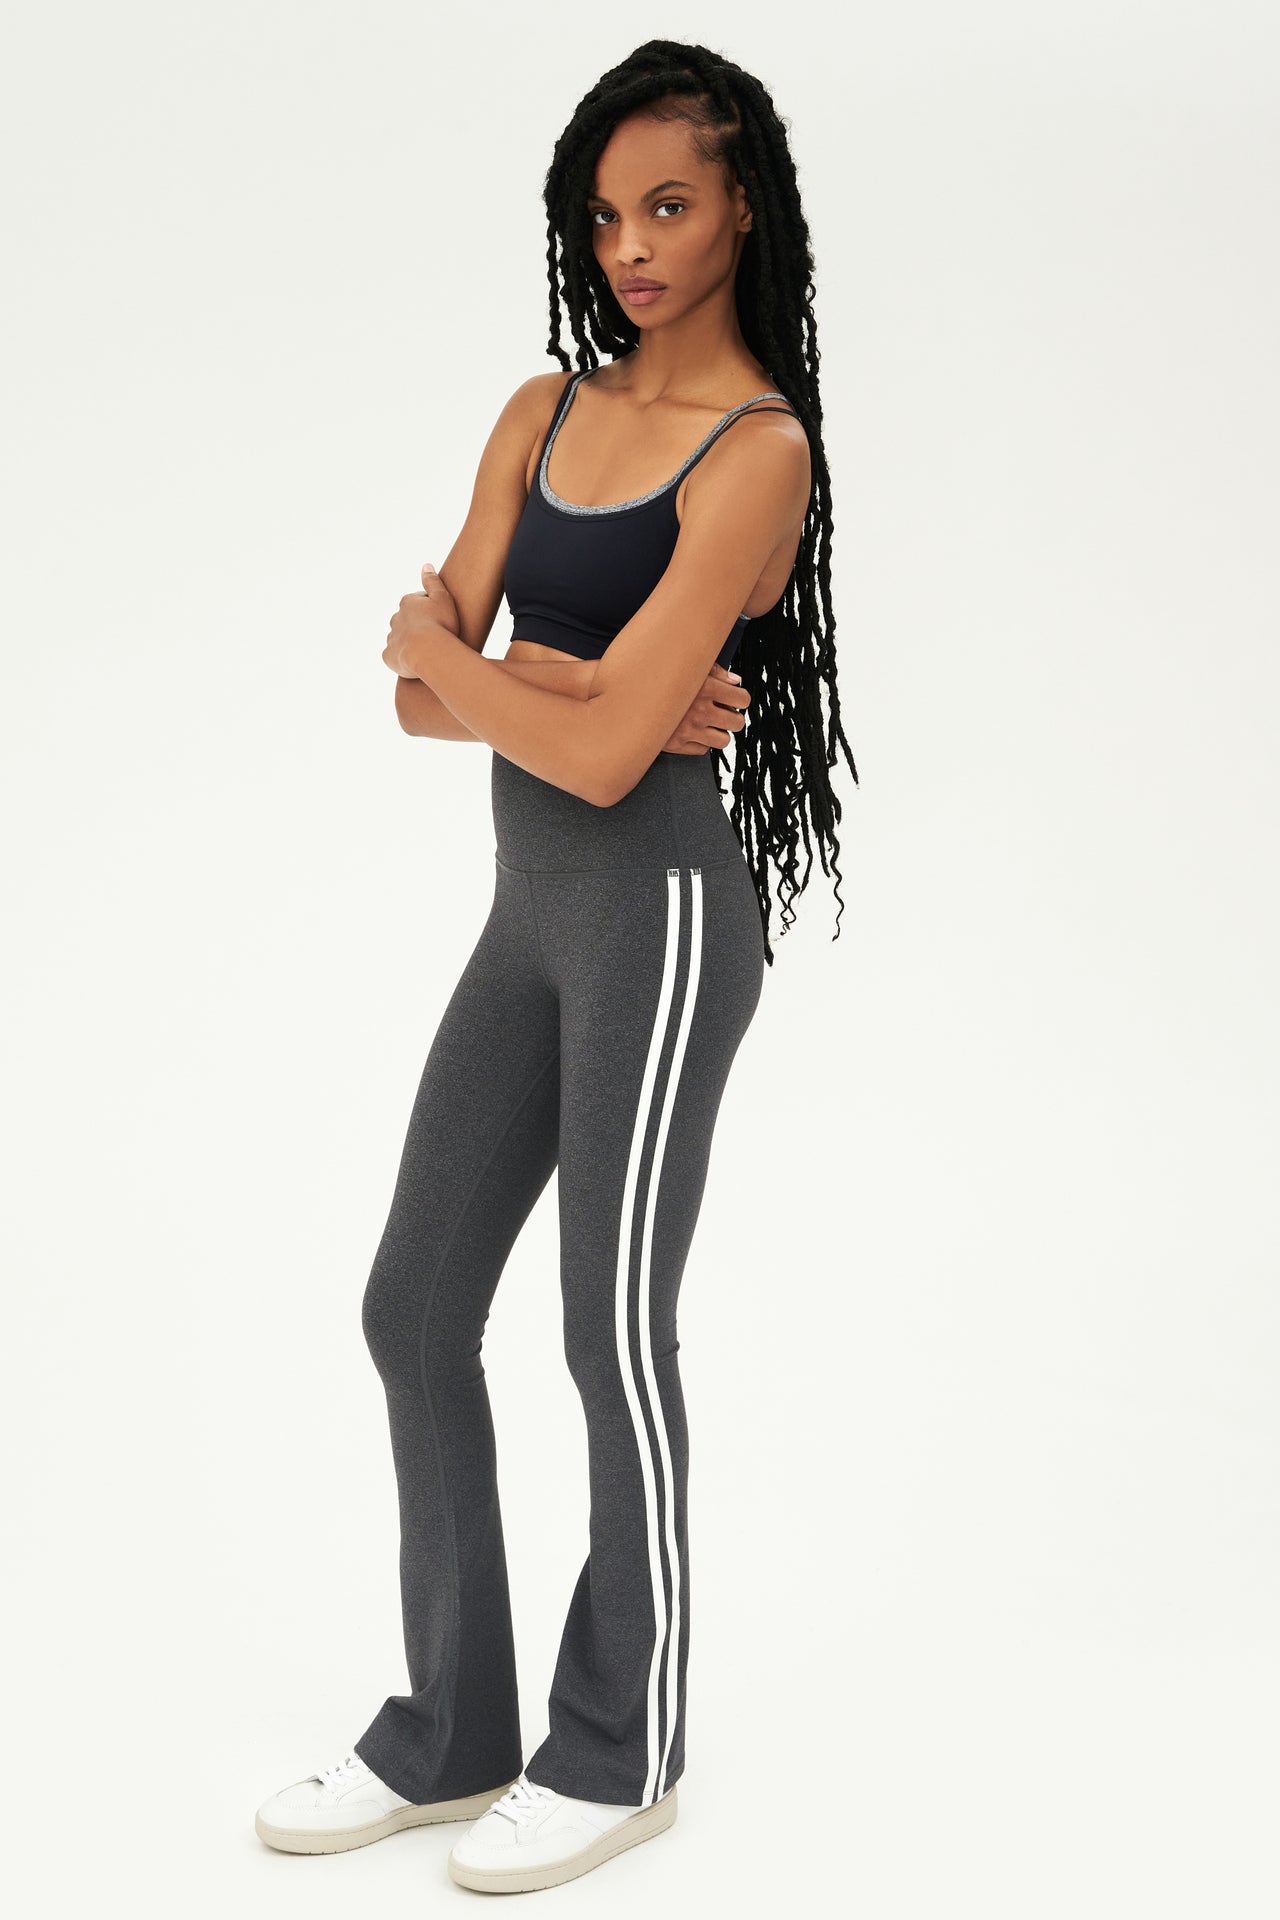 Full front side view of woman with black braided hair wearing dark gray high waist below ankle length legging with wide flared bottoms and double white stripes on both legs. Also double dark gray and black racerback bra with spaghetti straps. Paired with white shoes.